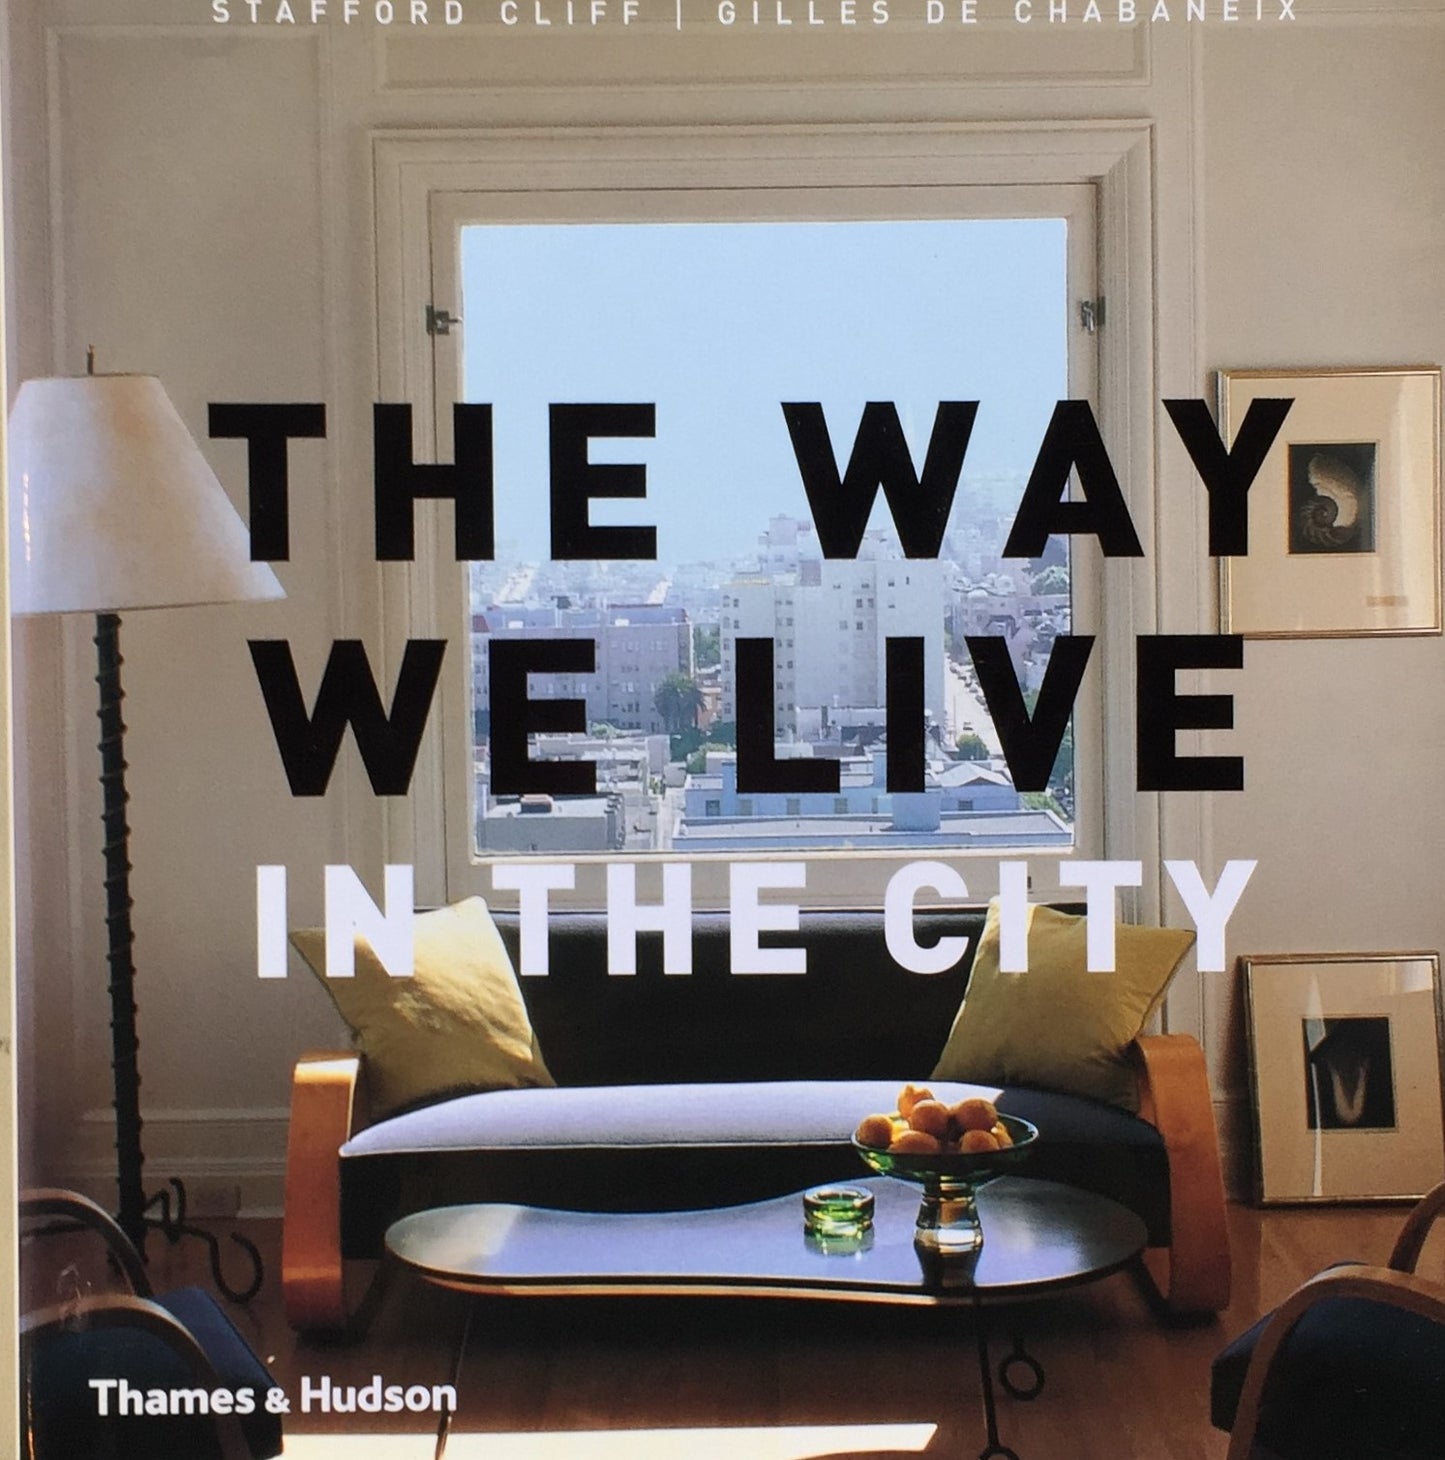 The Way We Live In the City　Stafford Cliff　Gilles de Chabaneix